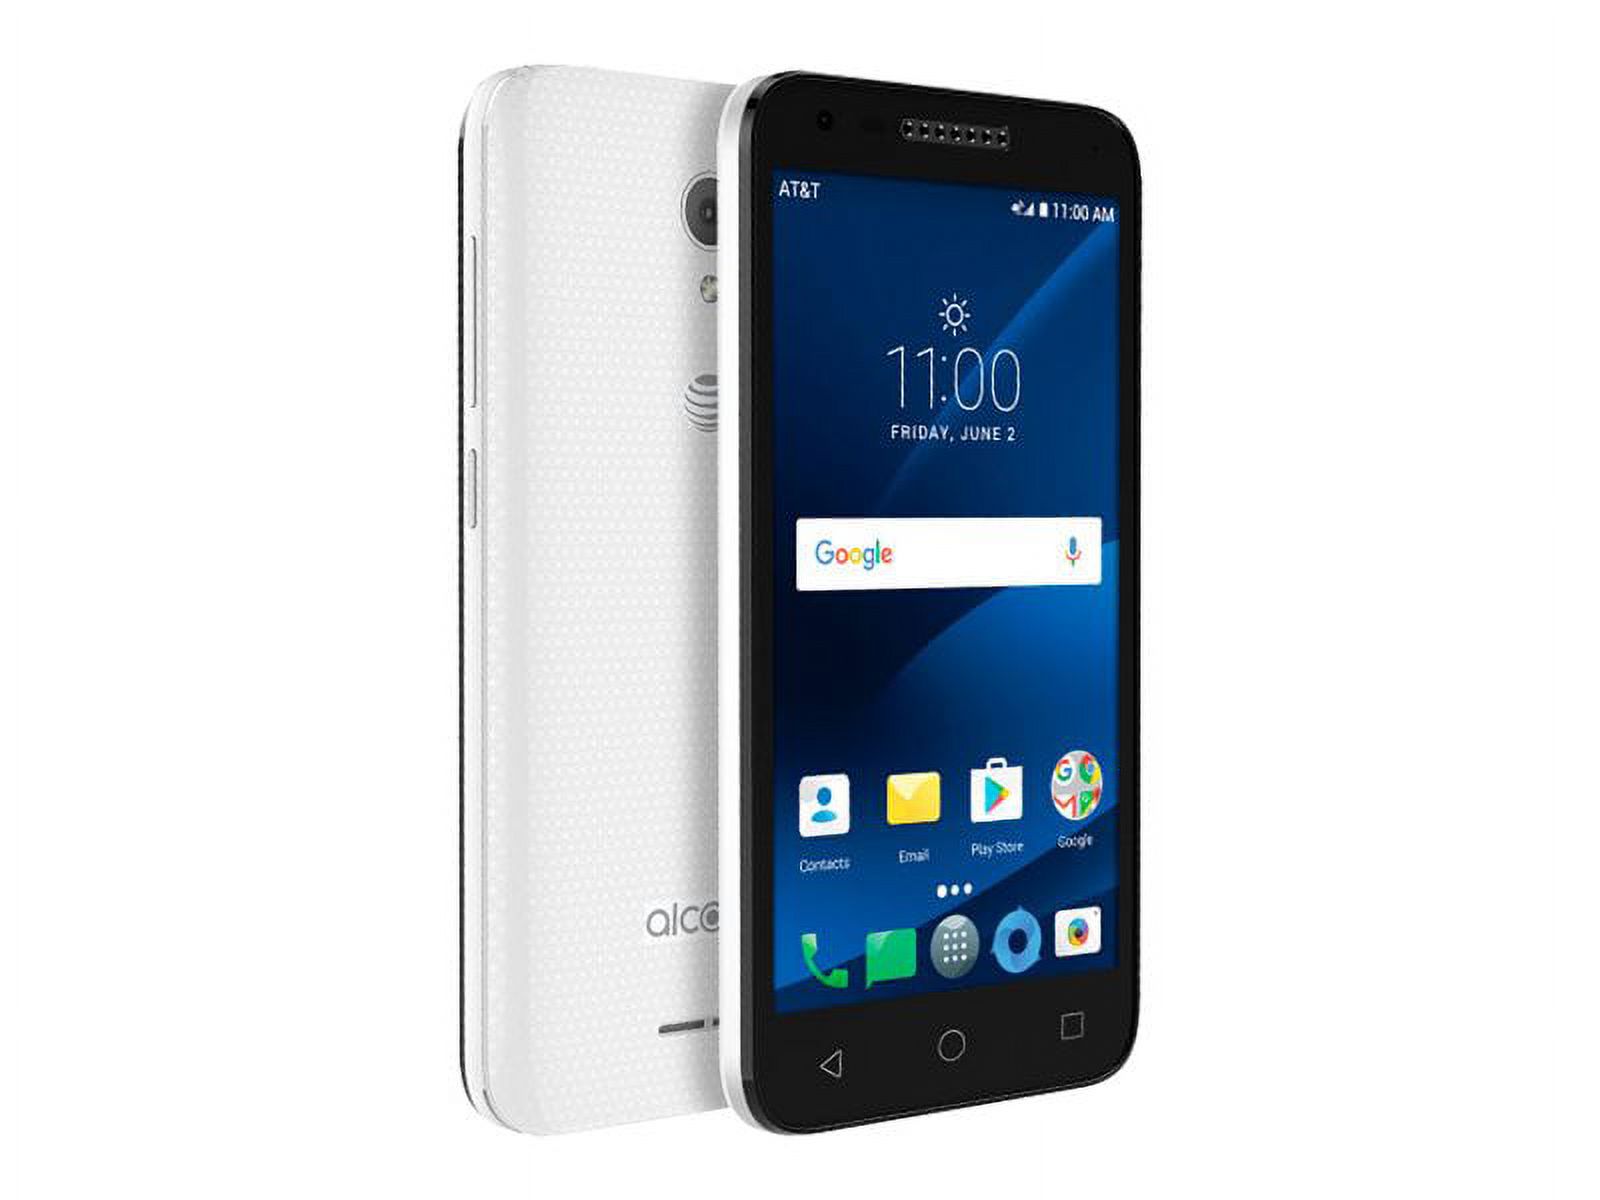 Alcatel - CAMEOX 4G LTE with 16GB Memory Cell Phone - Arctic White (AT&T) - image 4 of 8